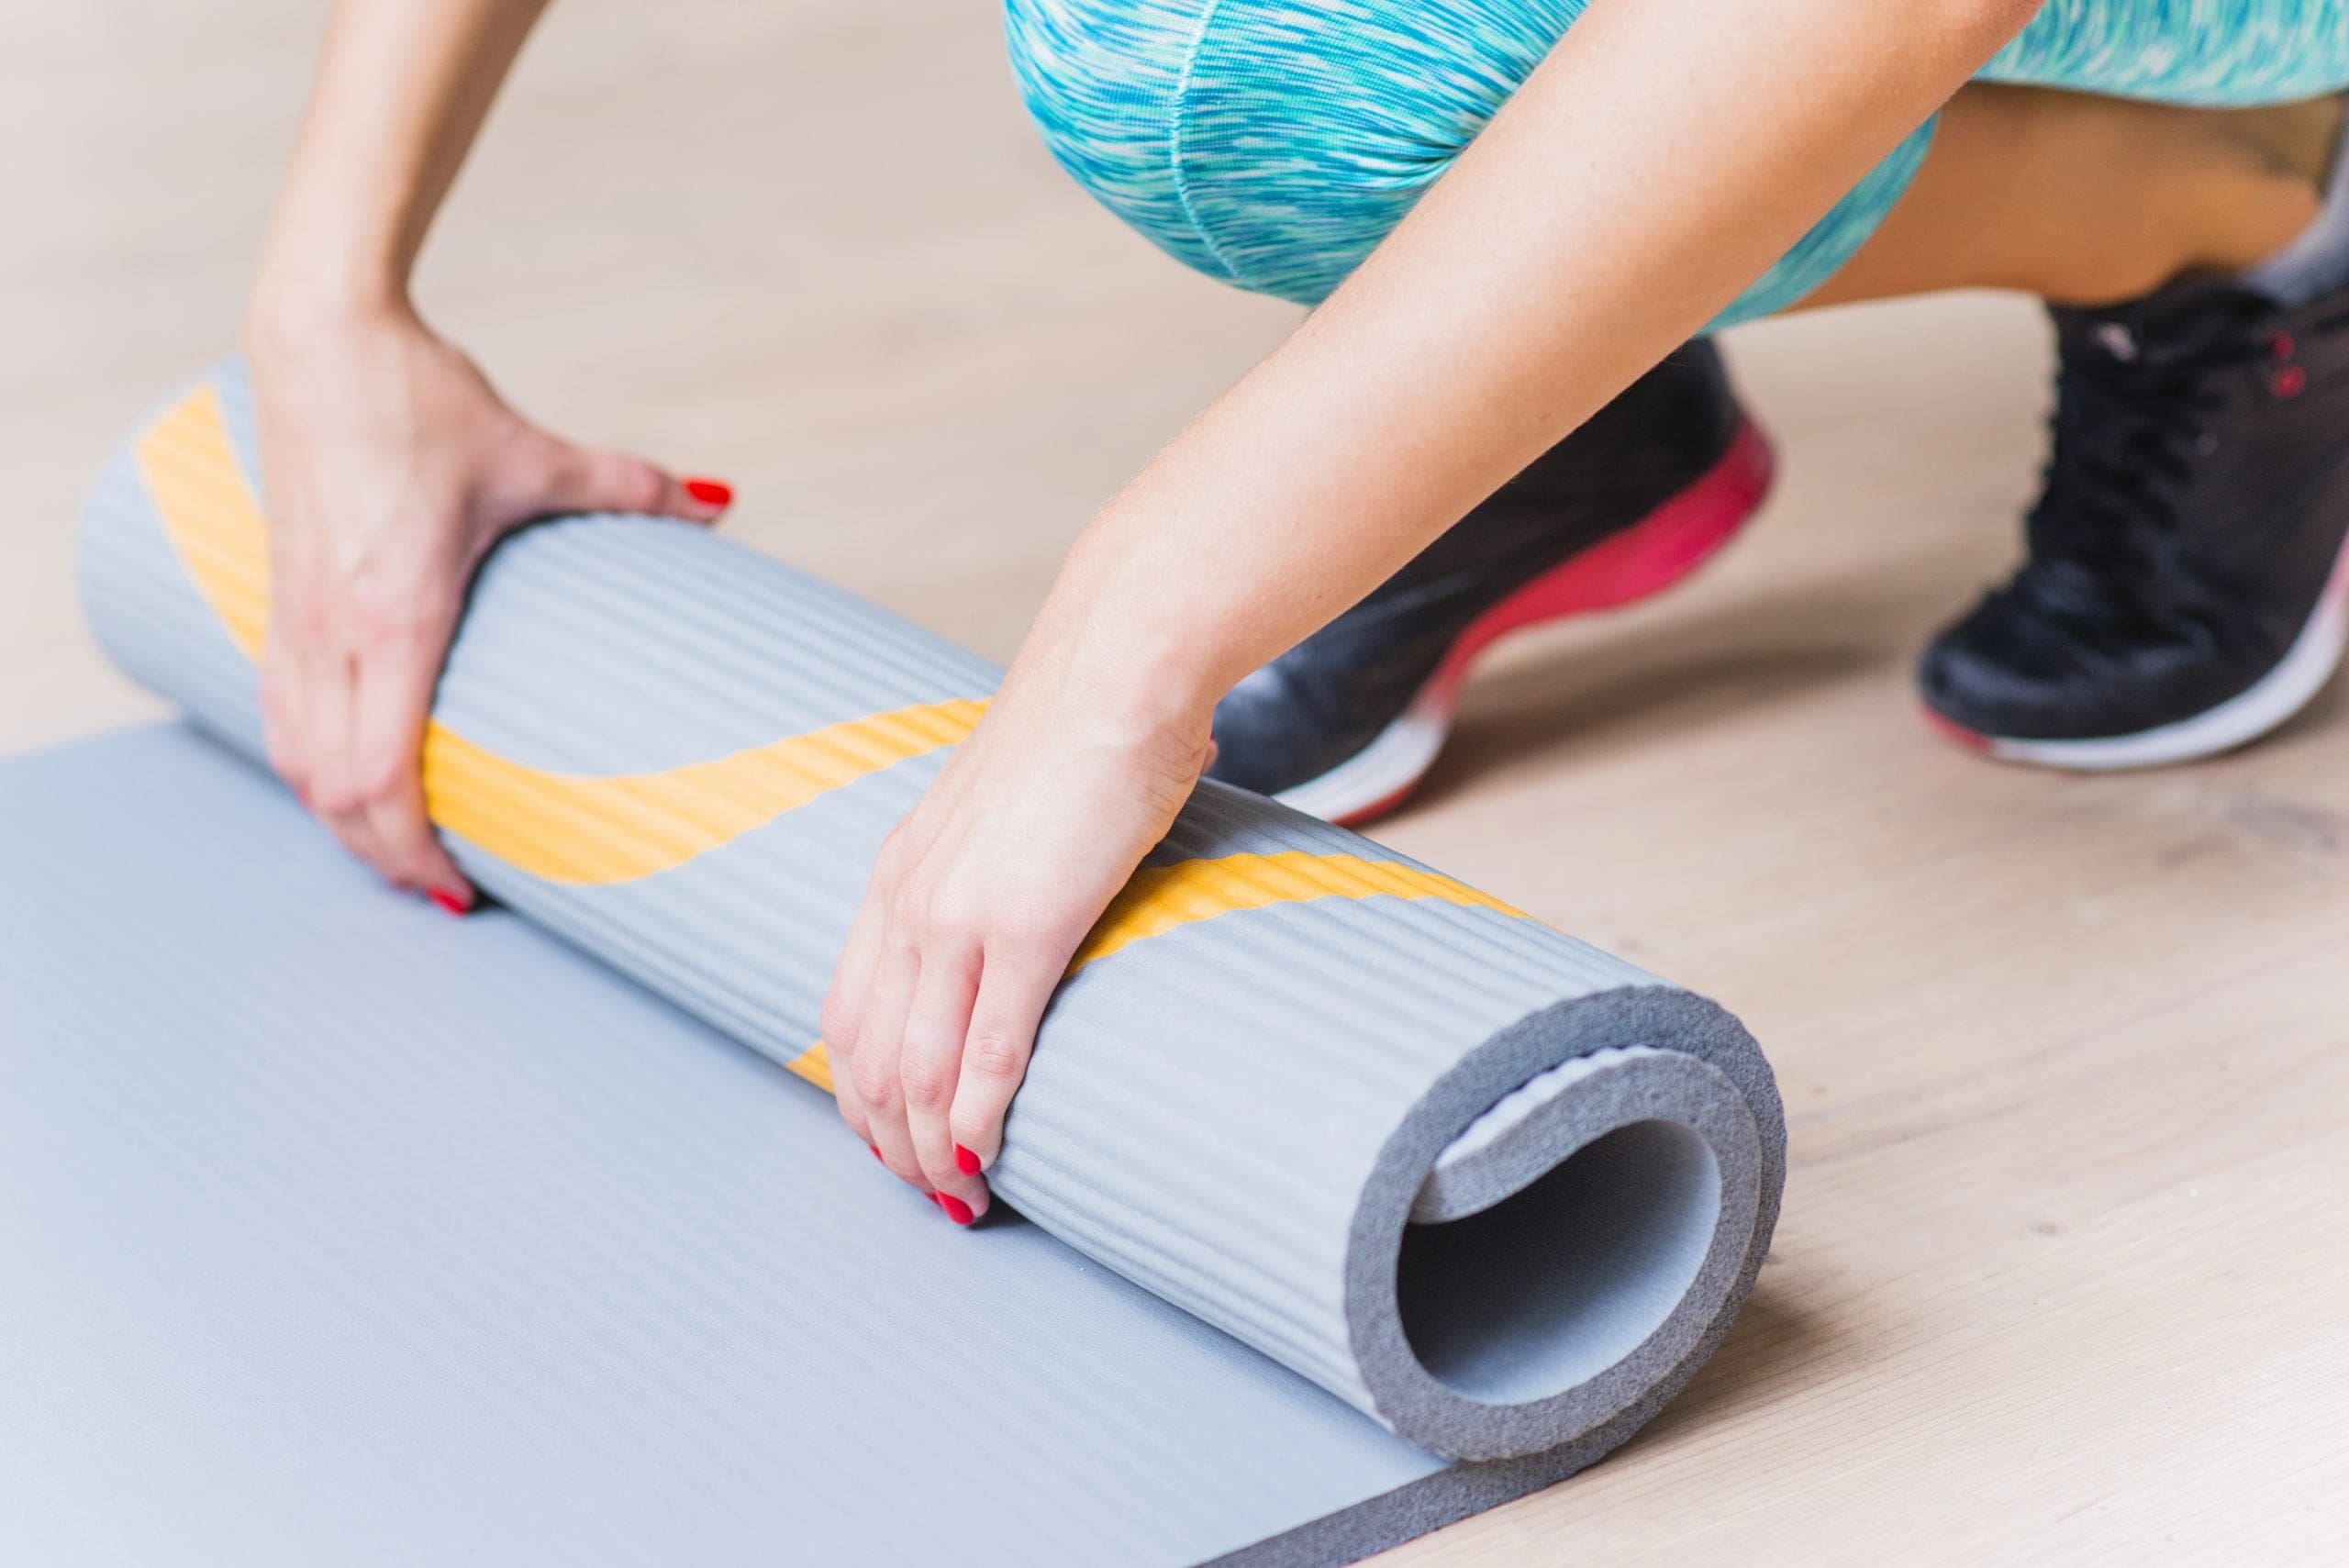 While building a home gym may seem like a large expense, it practically pays for itself. A typical gym membership costs at least $300 a year, not to mention the gas it would take you to travel back and forth each day. Building a home gym also allows you more flexibility and control over your daily health and fitness routine.